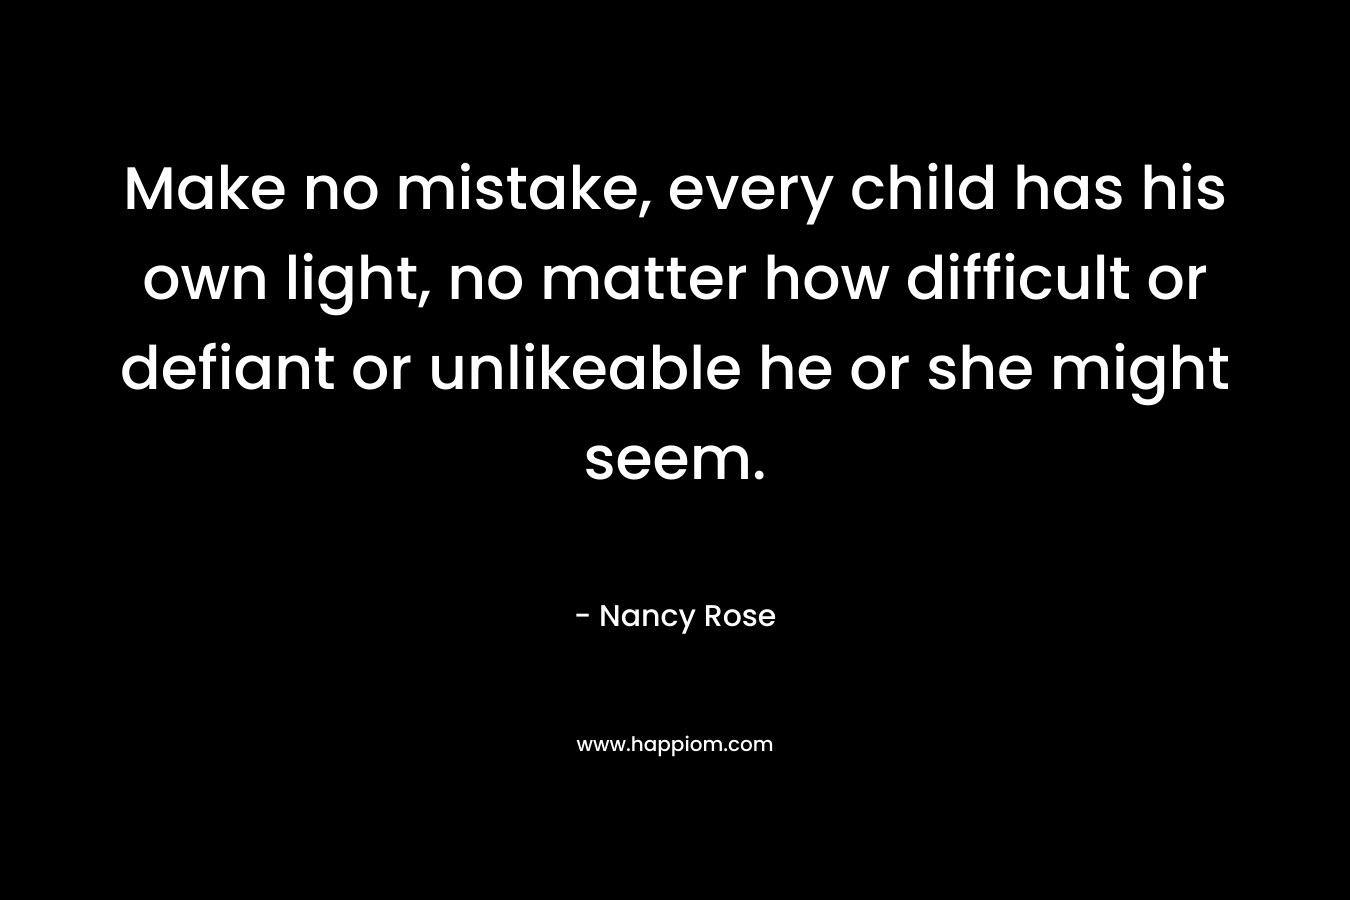 Make no mistake, every child has his own light, no matter how difficult or defiant or unlikeable he or she might seem. – Nancy Rose